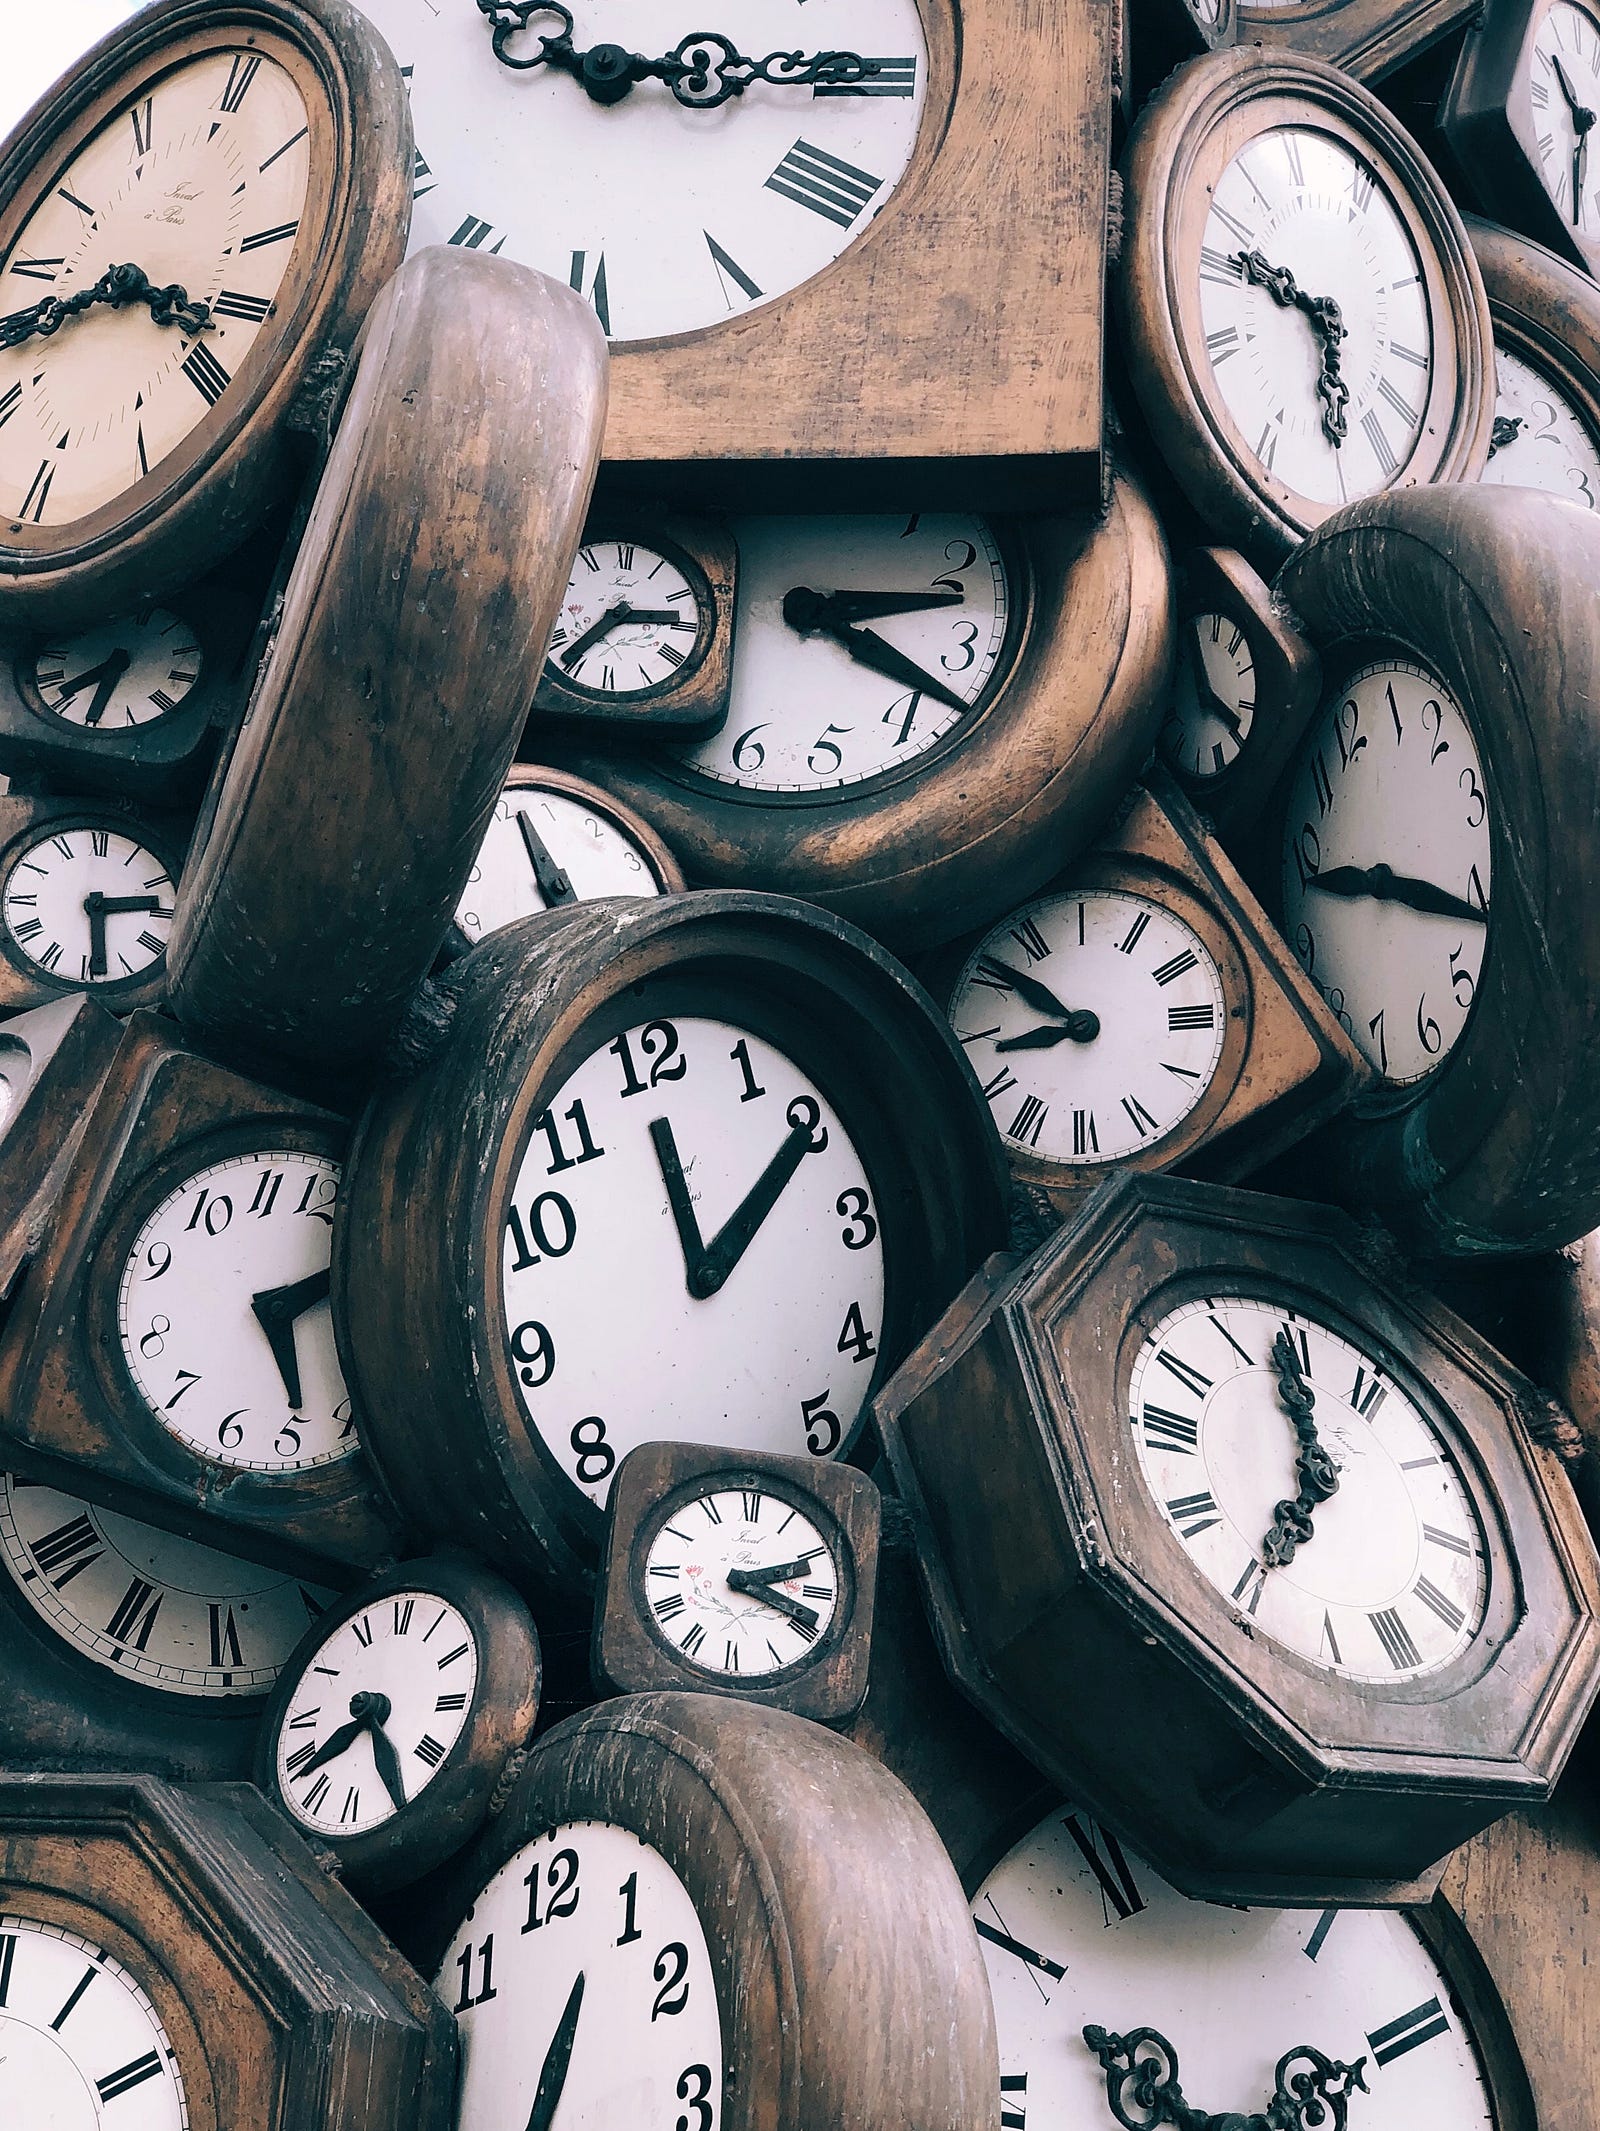 A dozen old wooden clocks sit in a pile. One small study discovered this: Sleep-deprived young men had high levels of the appetite-stimulating hormone ghrelin and lower levels of the satiety-inducing hormone leptin.